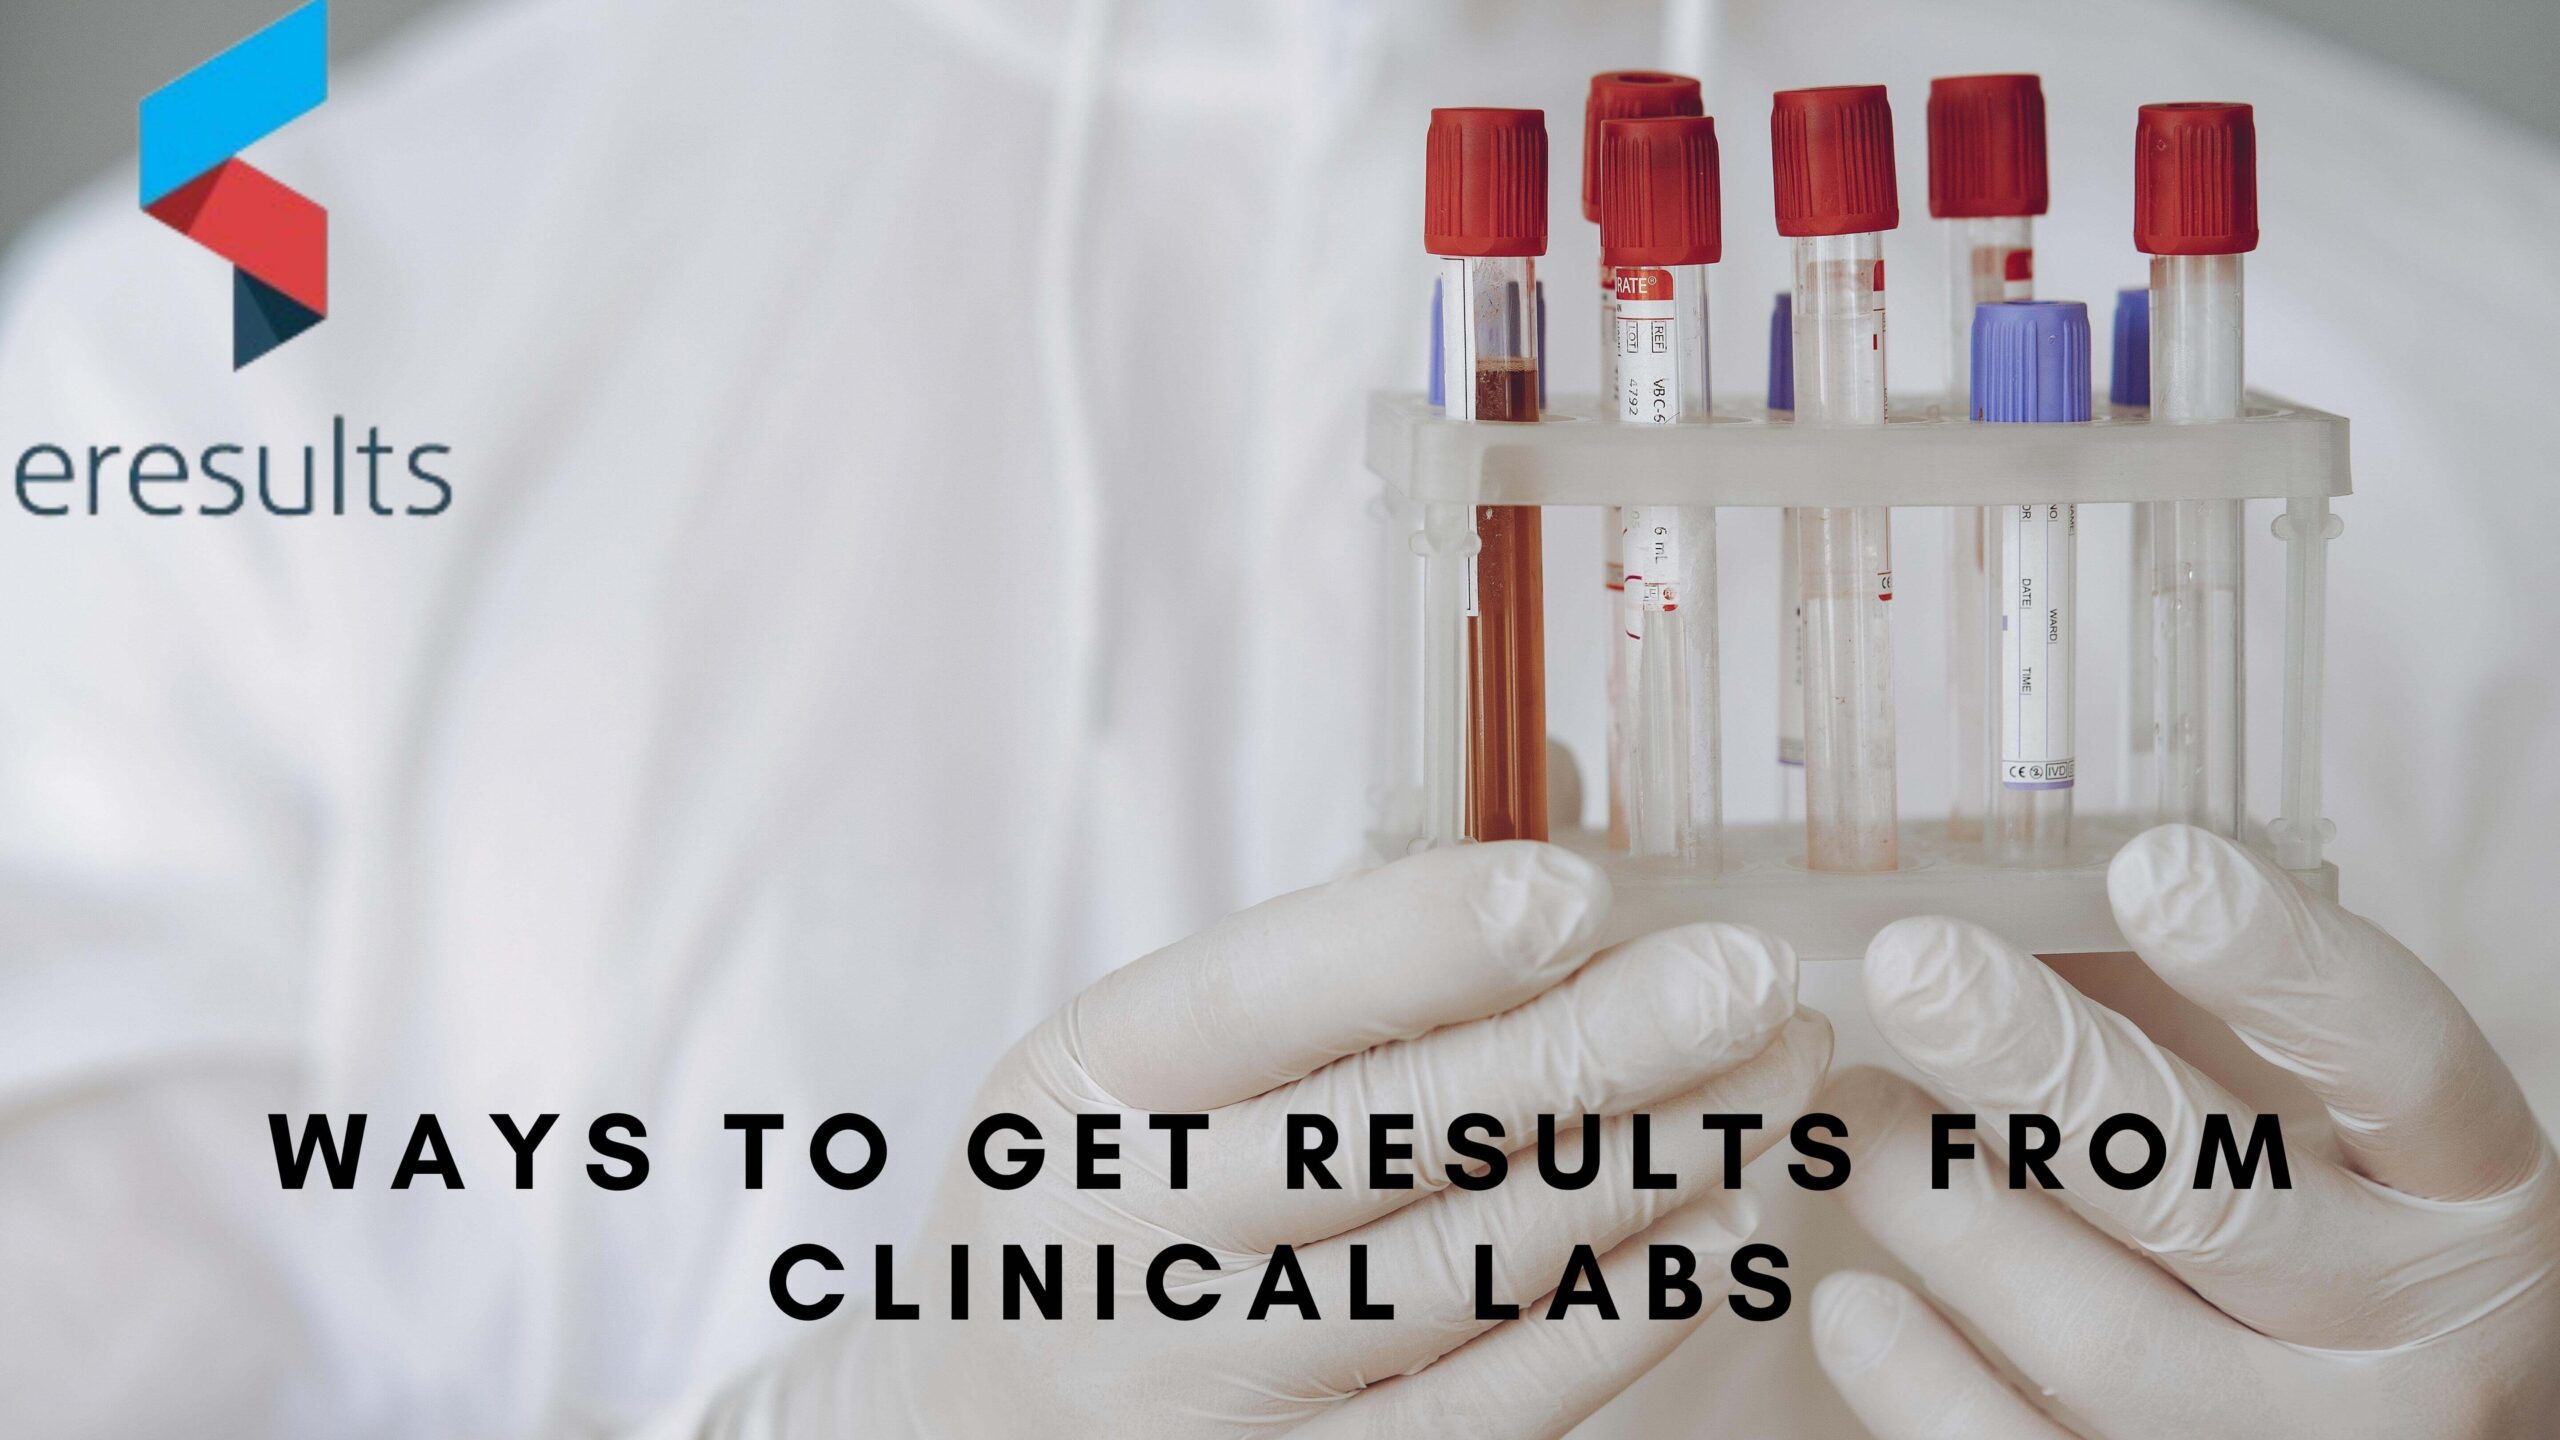 The Fastest Ways to Get EResults From Clinical Labs